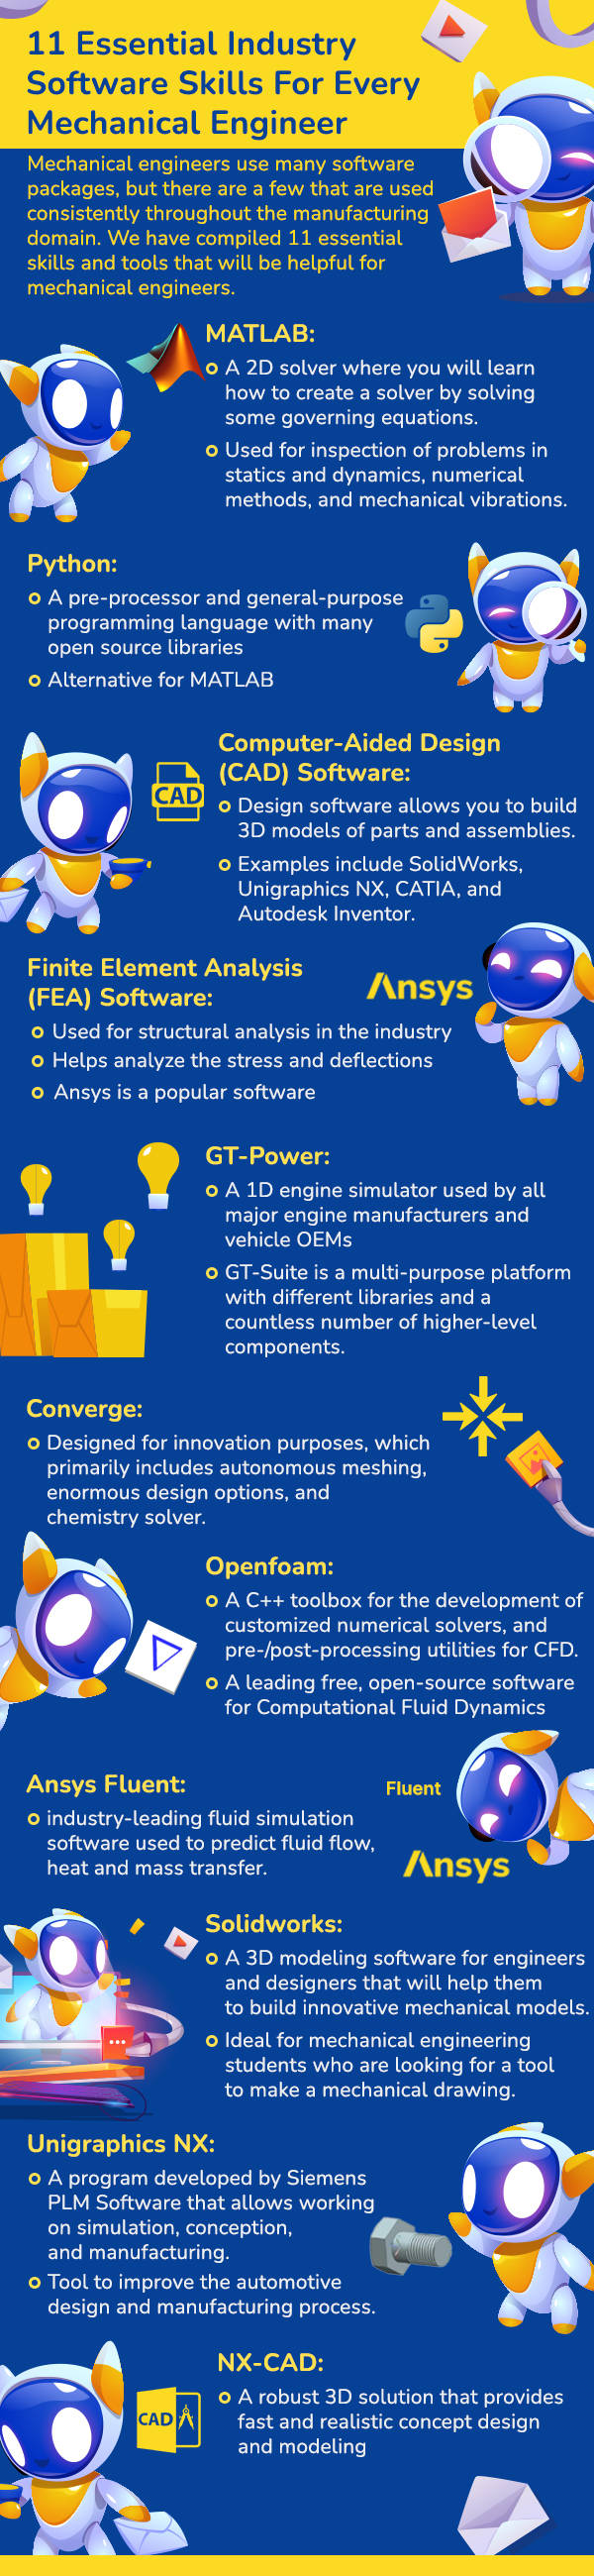 Most Essential Industry Software Skills for every Mechanical Engineer 65366 1 - Most Essential Industry Software Skills for every Mechanical Engineer